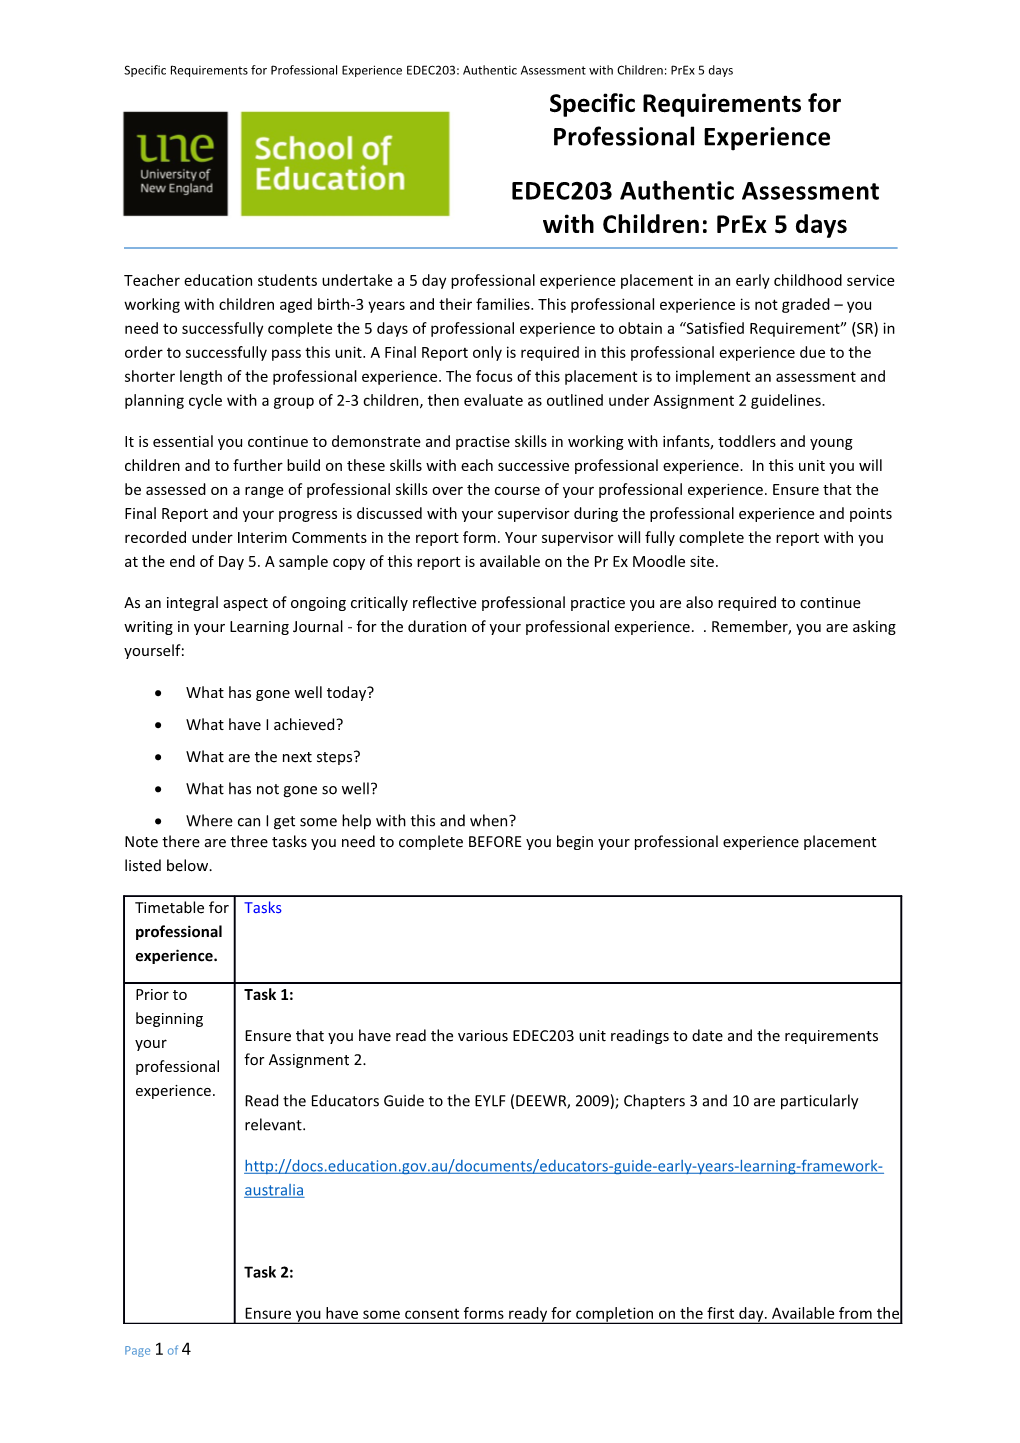 Specific Requirements for Professional Experience EDEC203: Authentic Assessment with Children